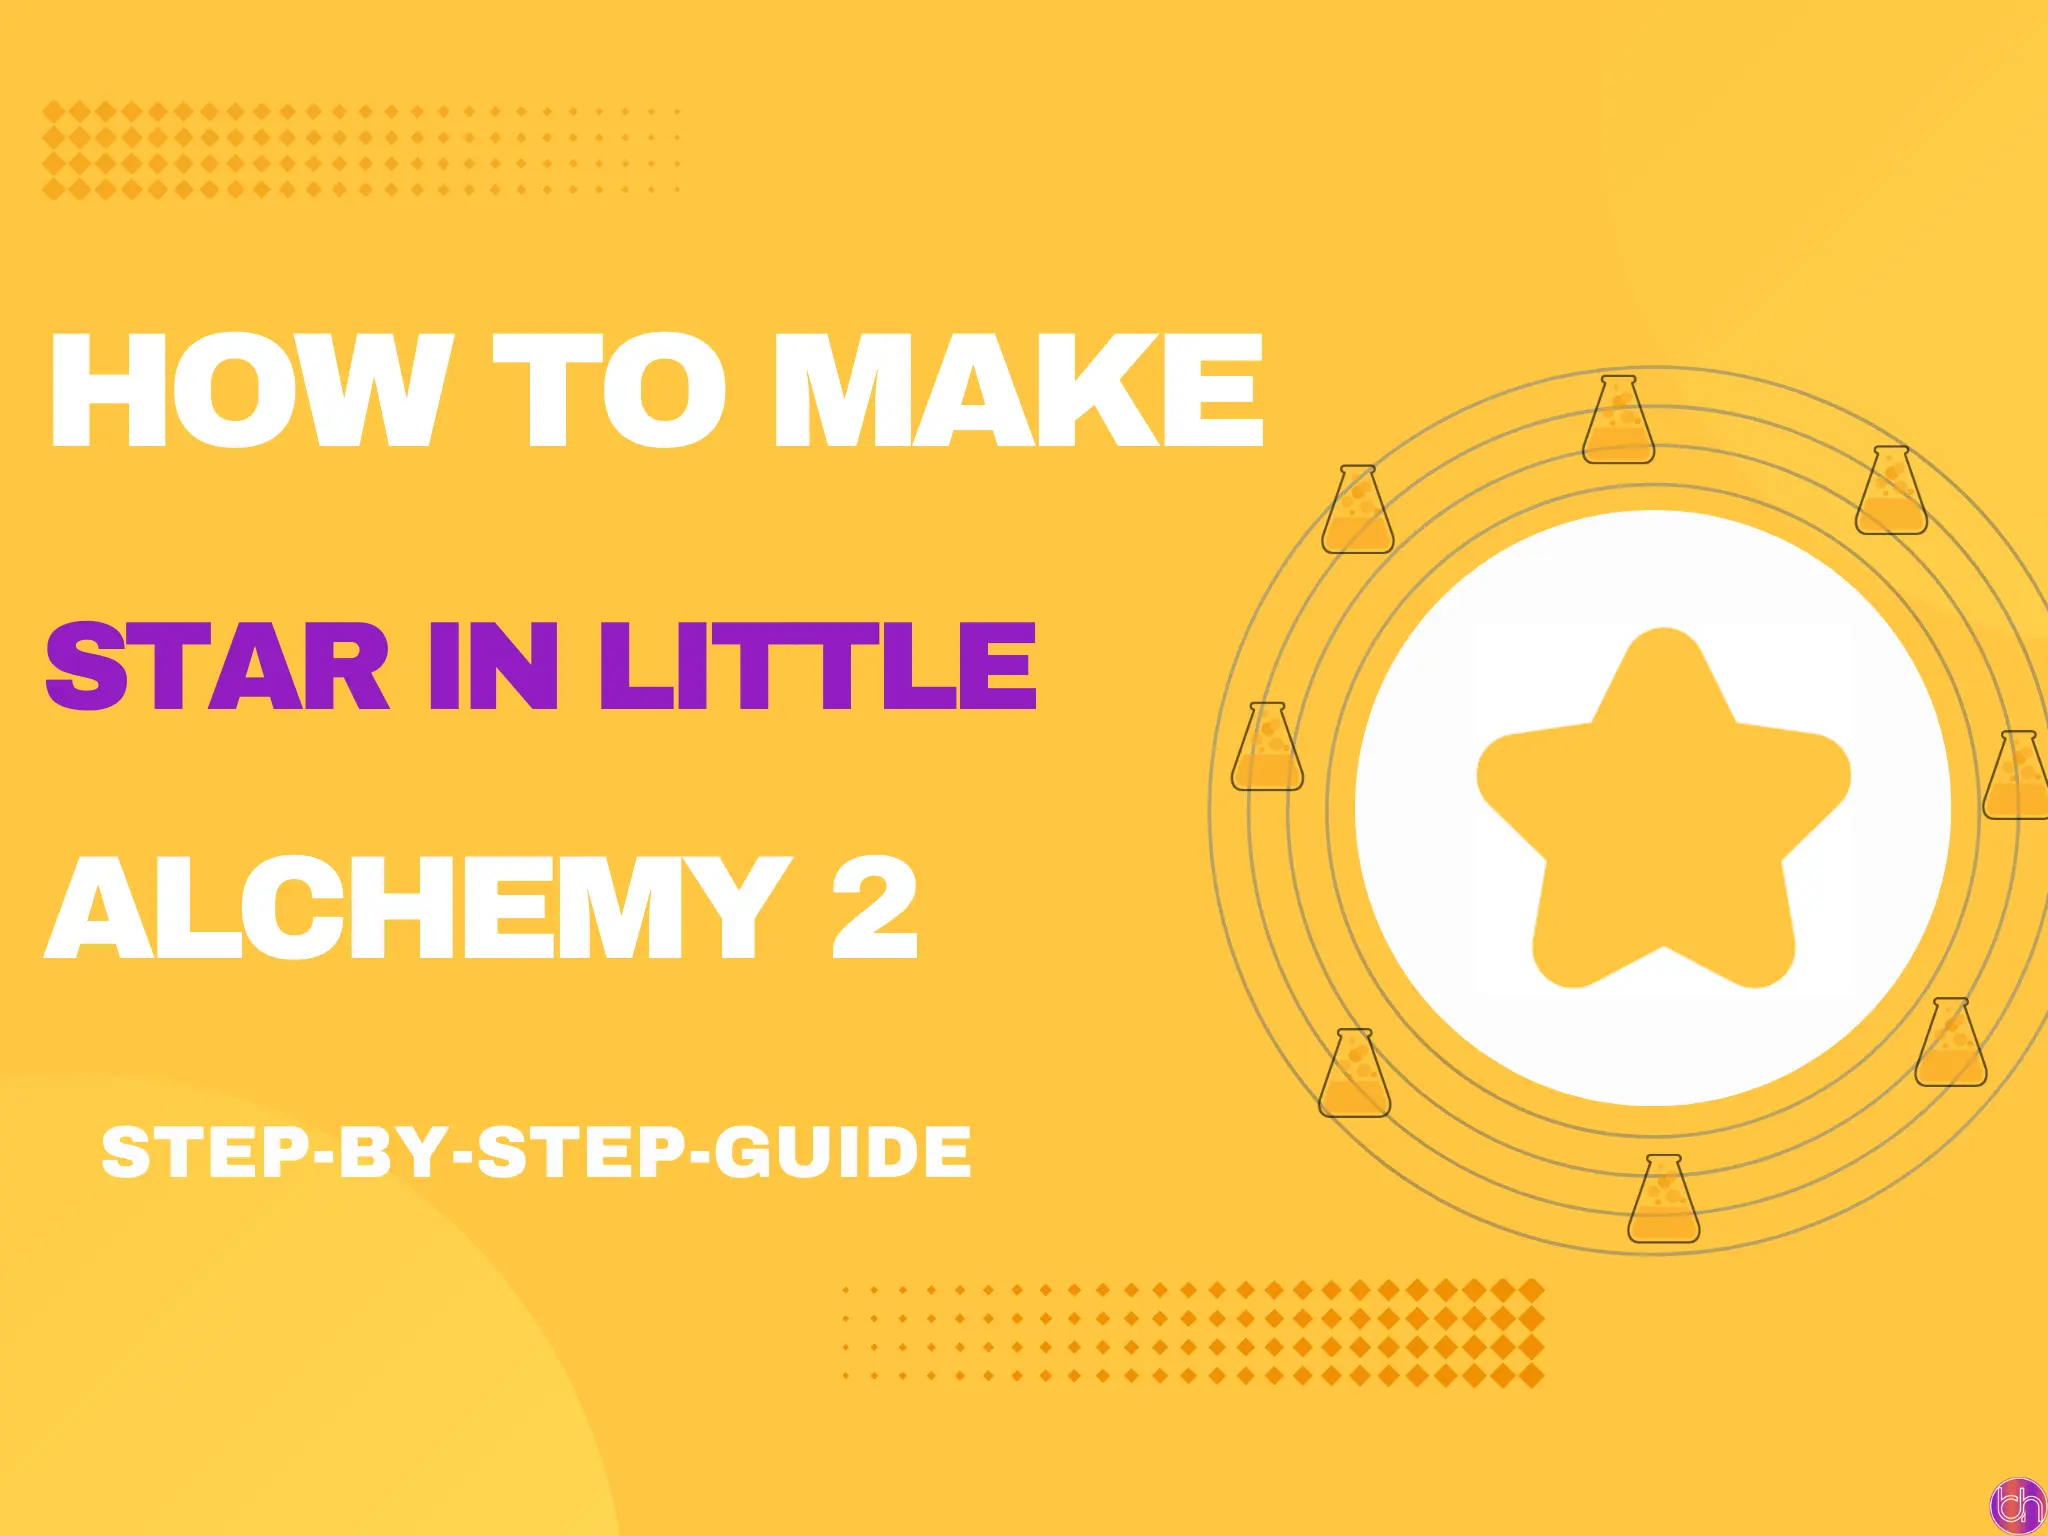 How to make Star in little alchemy 2